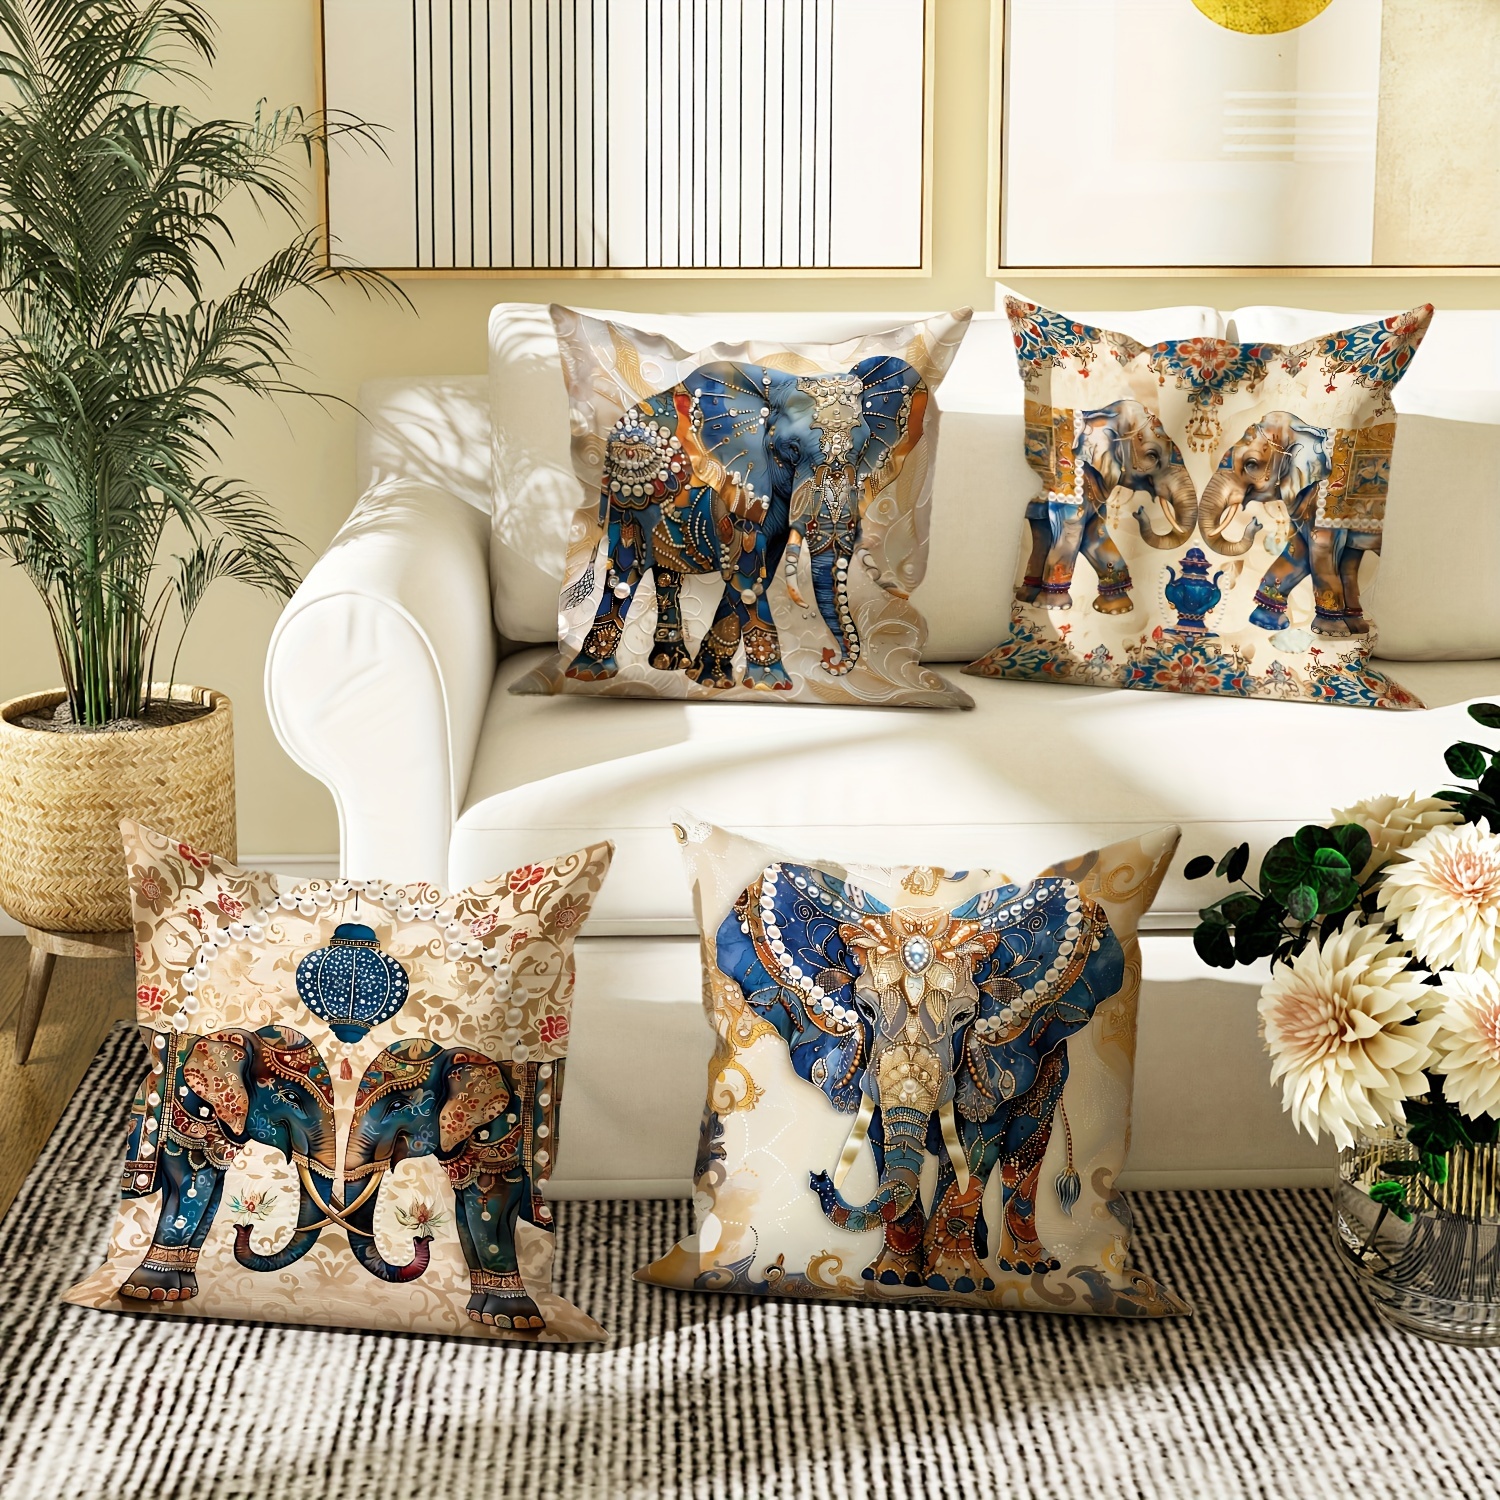 

4-piece Set Velvet Throw Pillow Covers With Elephant & Pearl Flower Design - Gold, Blue, Earthy Yellow | 18x18 Inches | Bohemian Ethnic Style Decorative Cushion Cases For Living Room & Bedroom Sofa